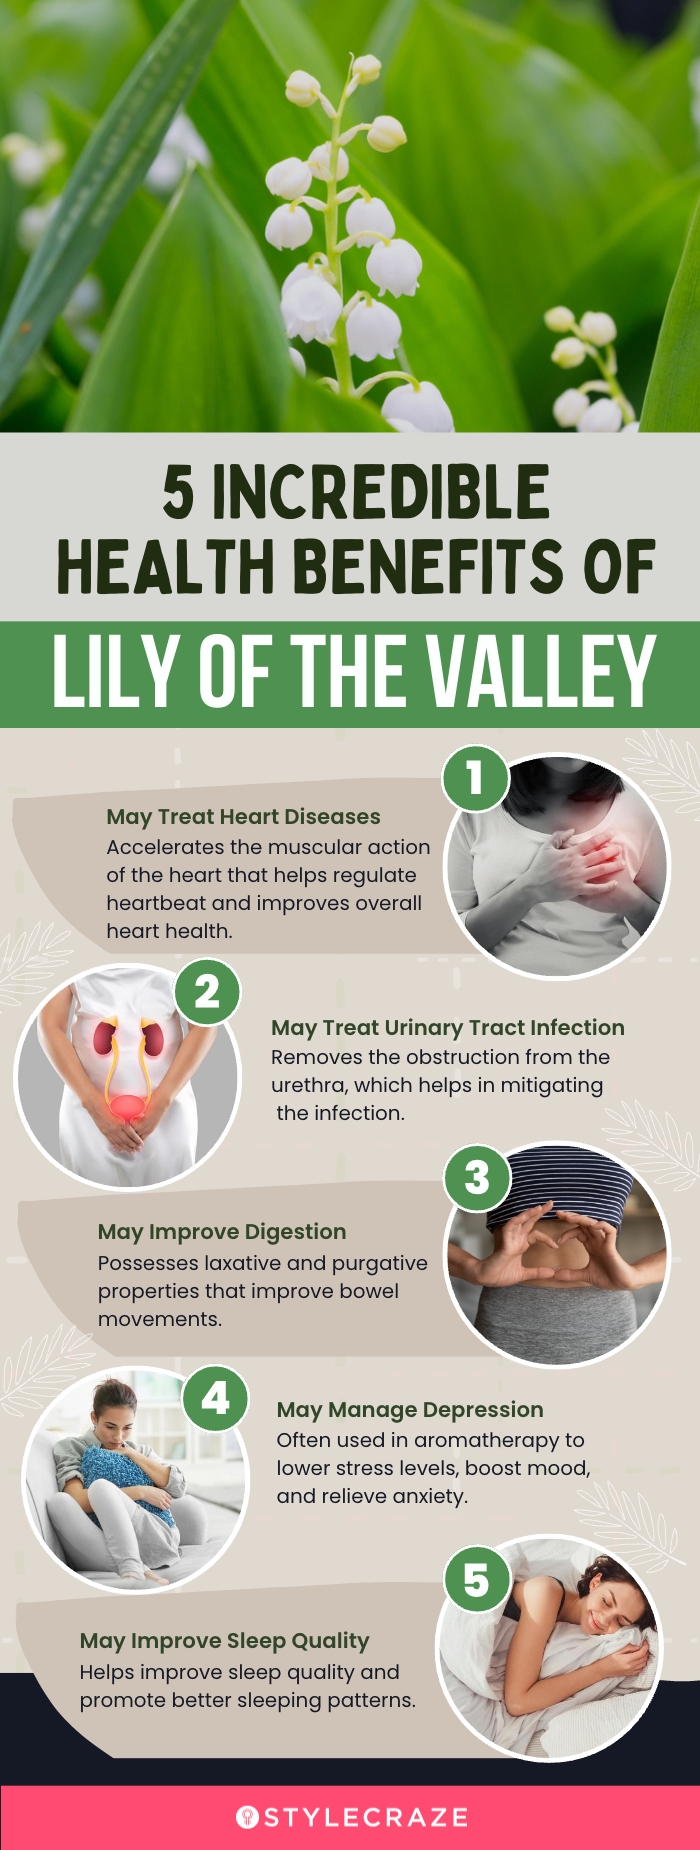 5 incredible health benefits of lily of the valley (infographic)